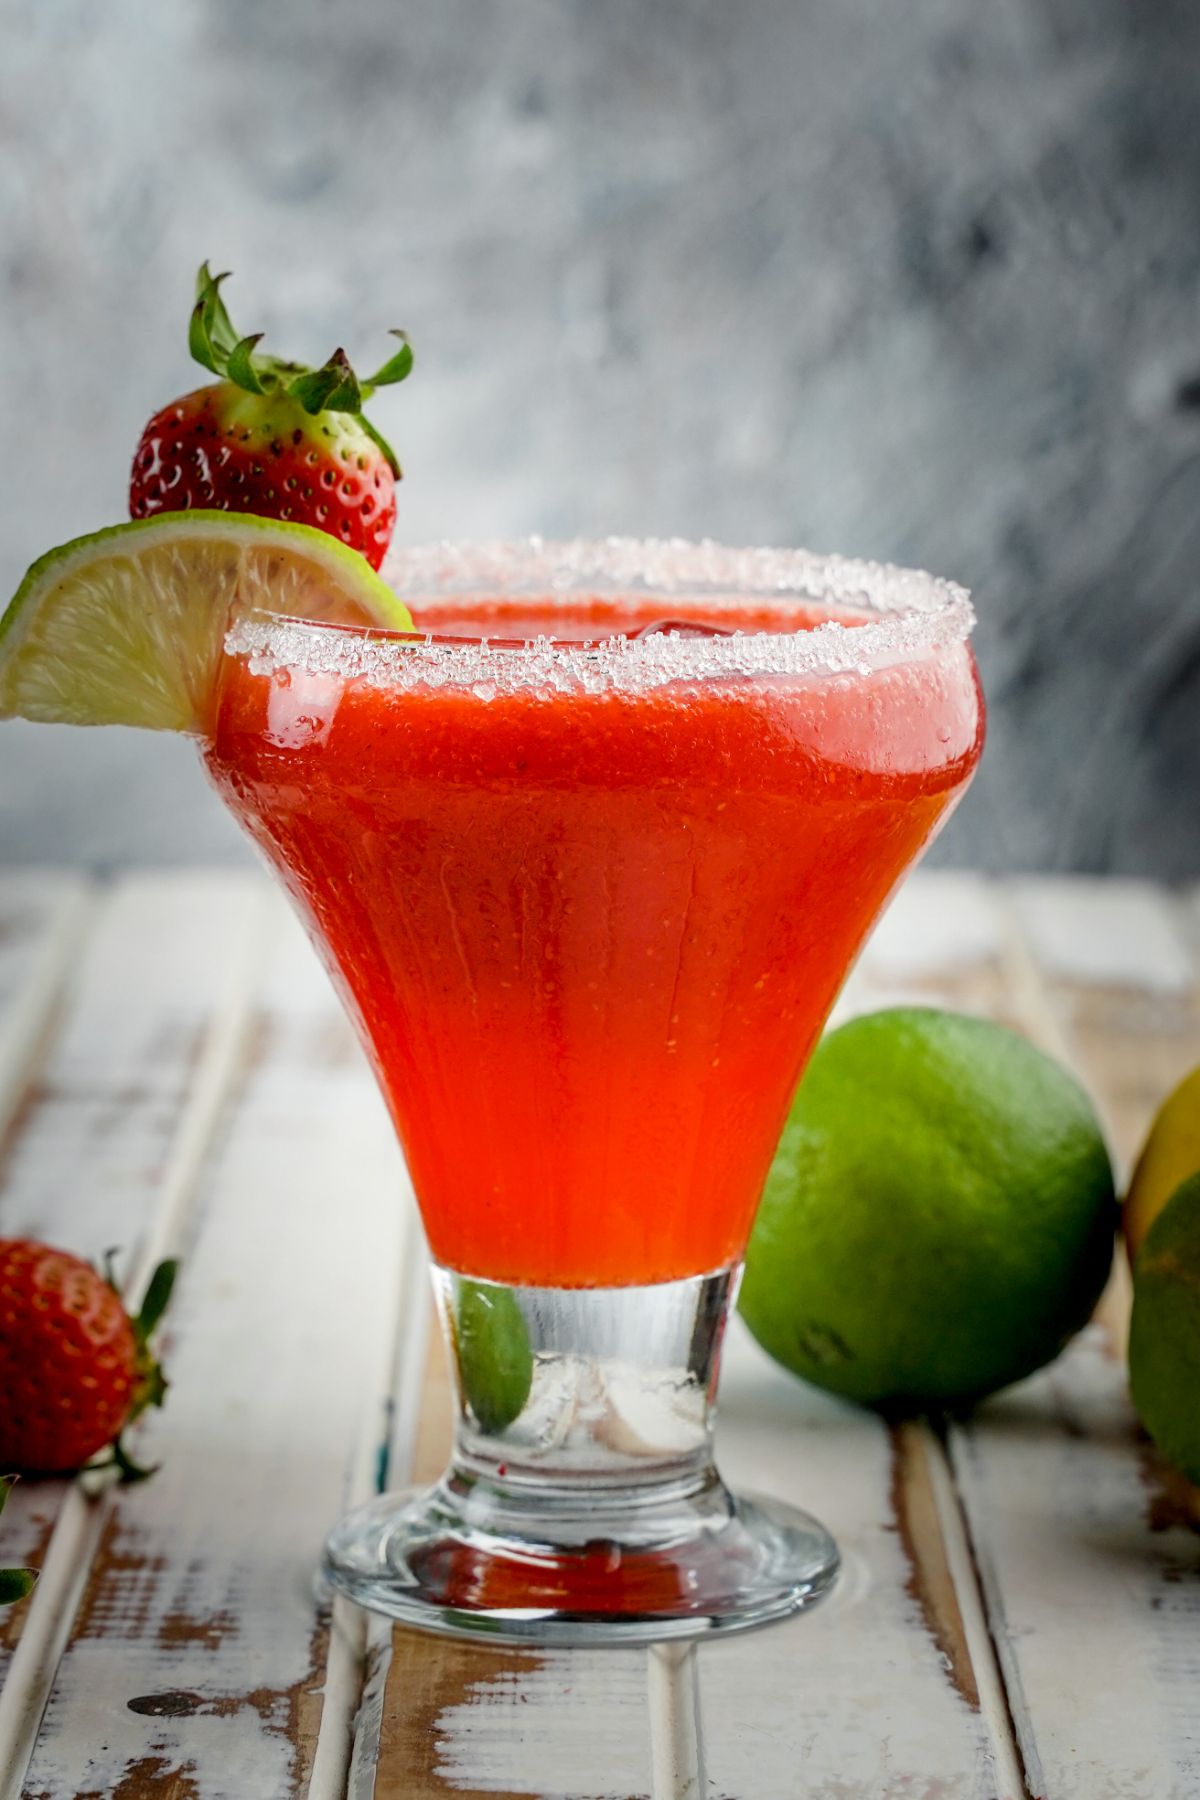 Strawberry daiquiri in a glass cup with lime strawberries.